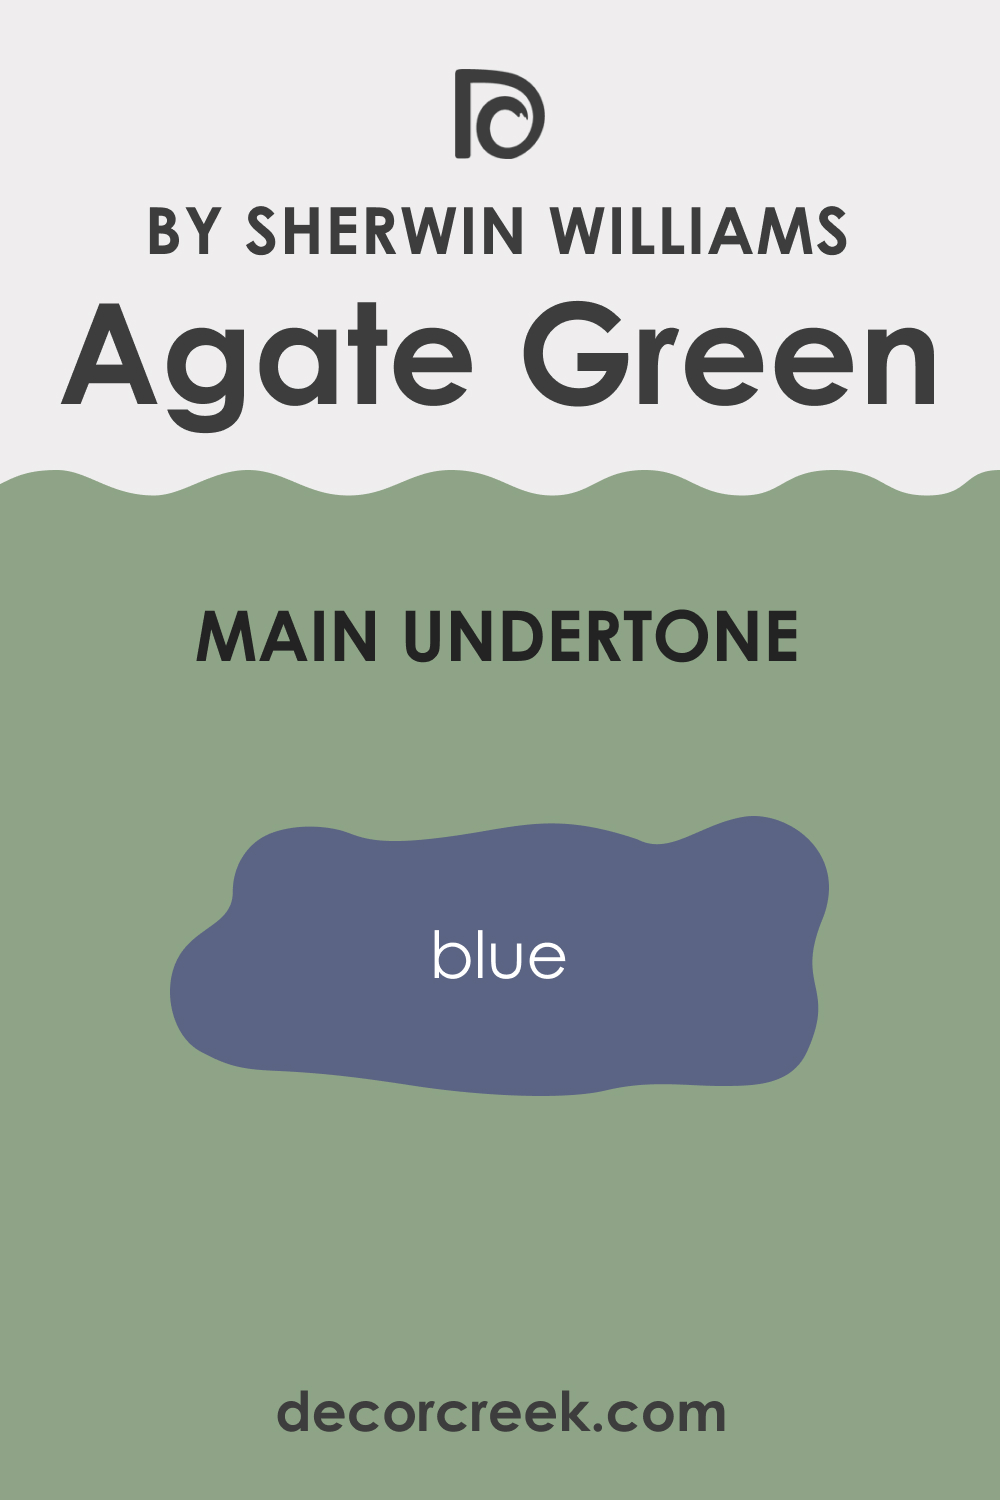 What Undertones Does Agate Green SW 7742 Have?